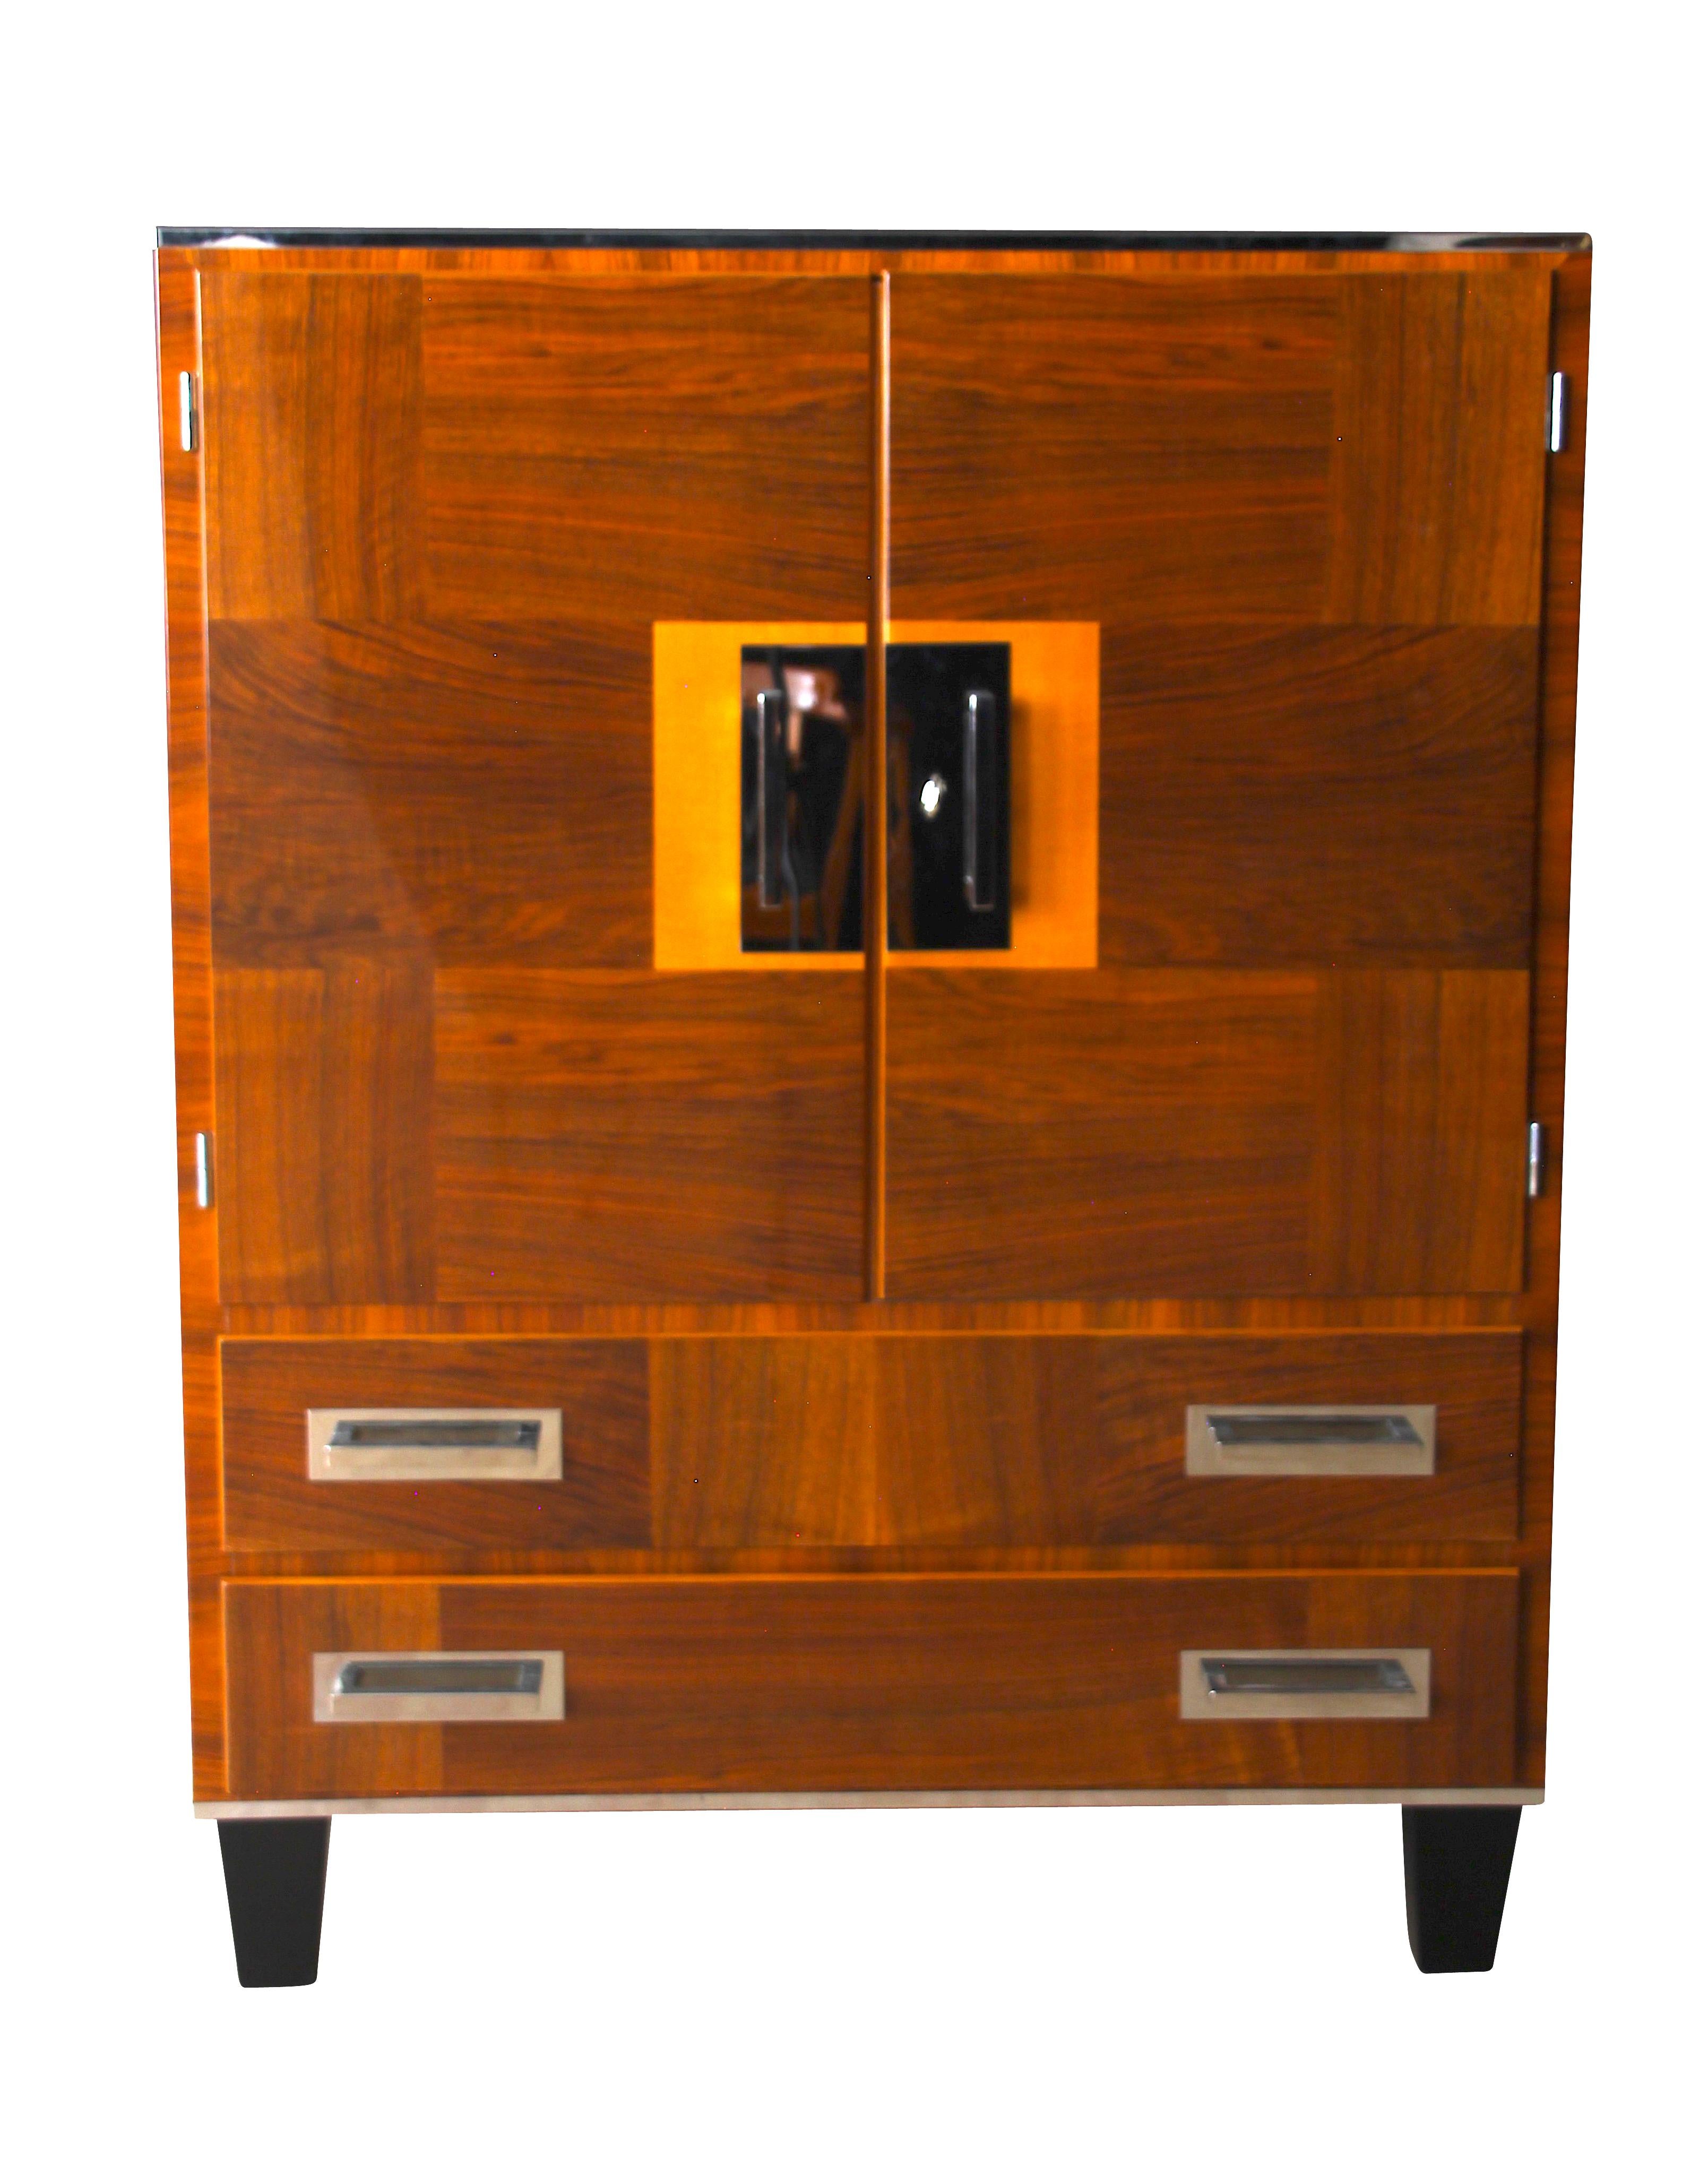 Strict / Spartan German Bauhaus cabinet from the 1930s with very functional interior.

Beautiful veneer work with vertically and horizontally in walnut. 
Wonderfully lacquered with 2k-PUR Clear Lacquer and high-gloss polished. 

Frontside has two